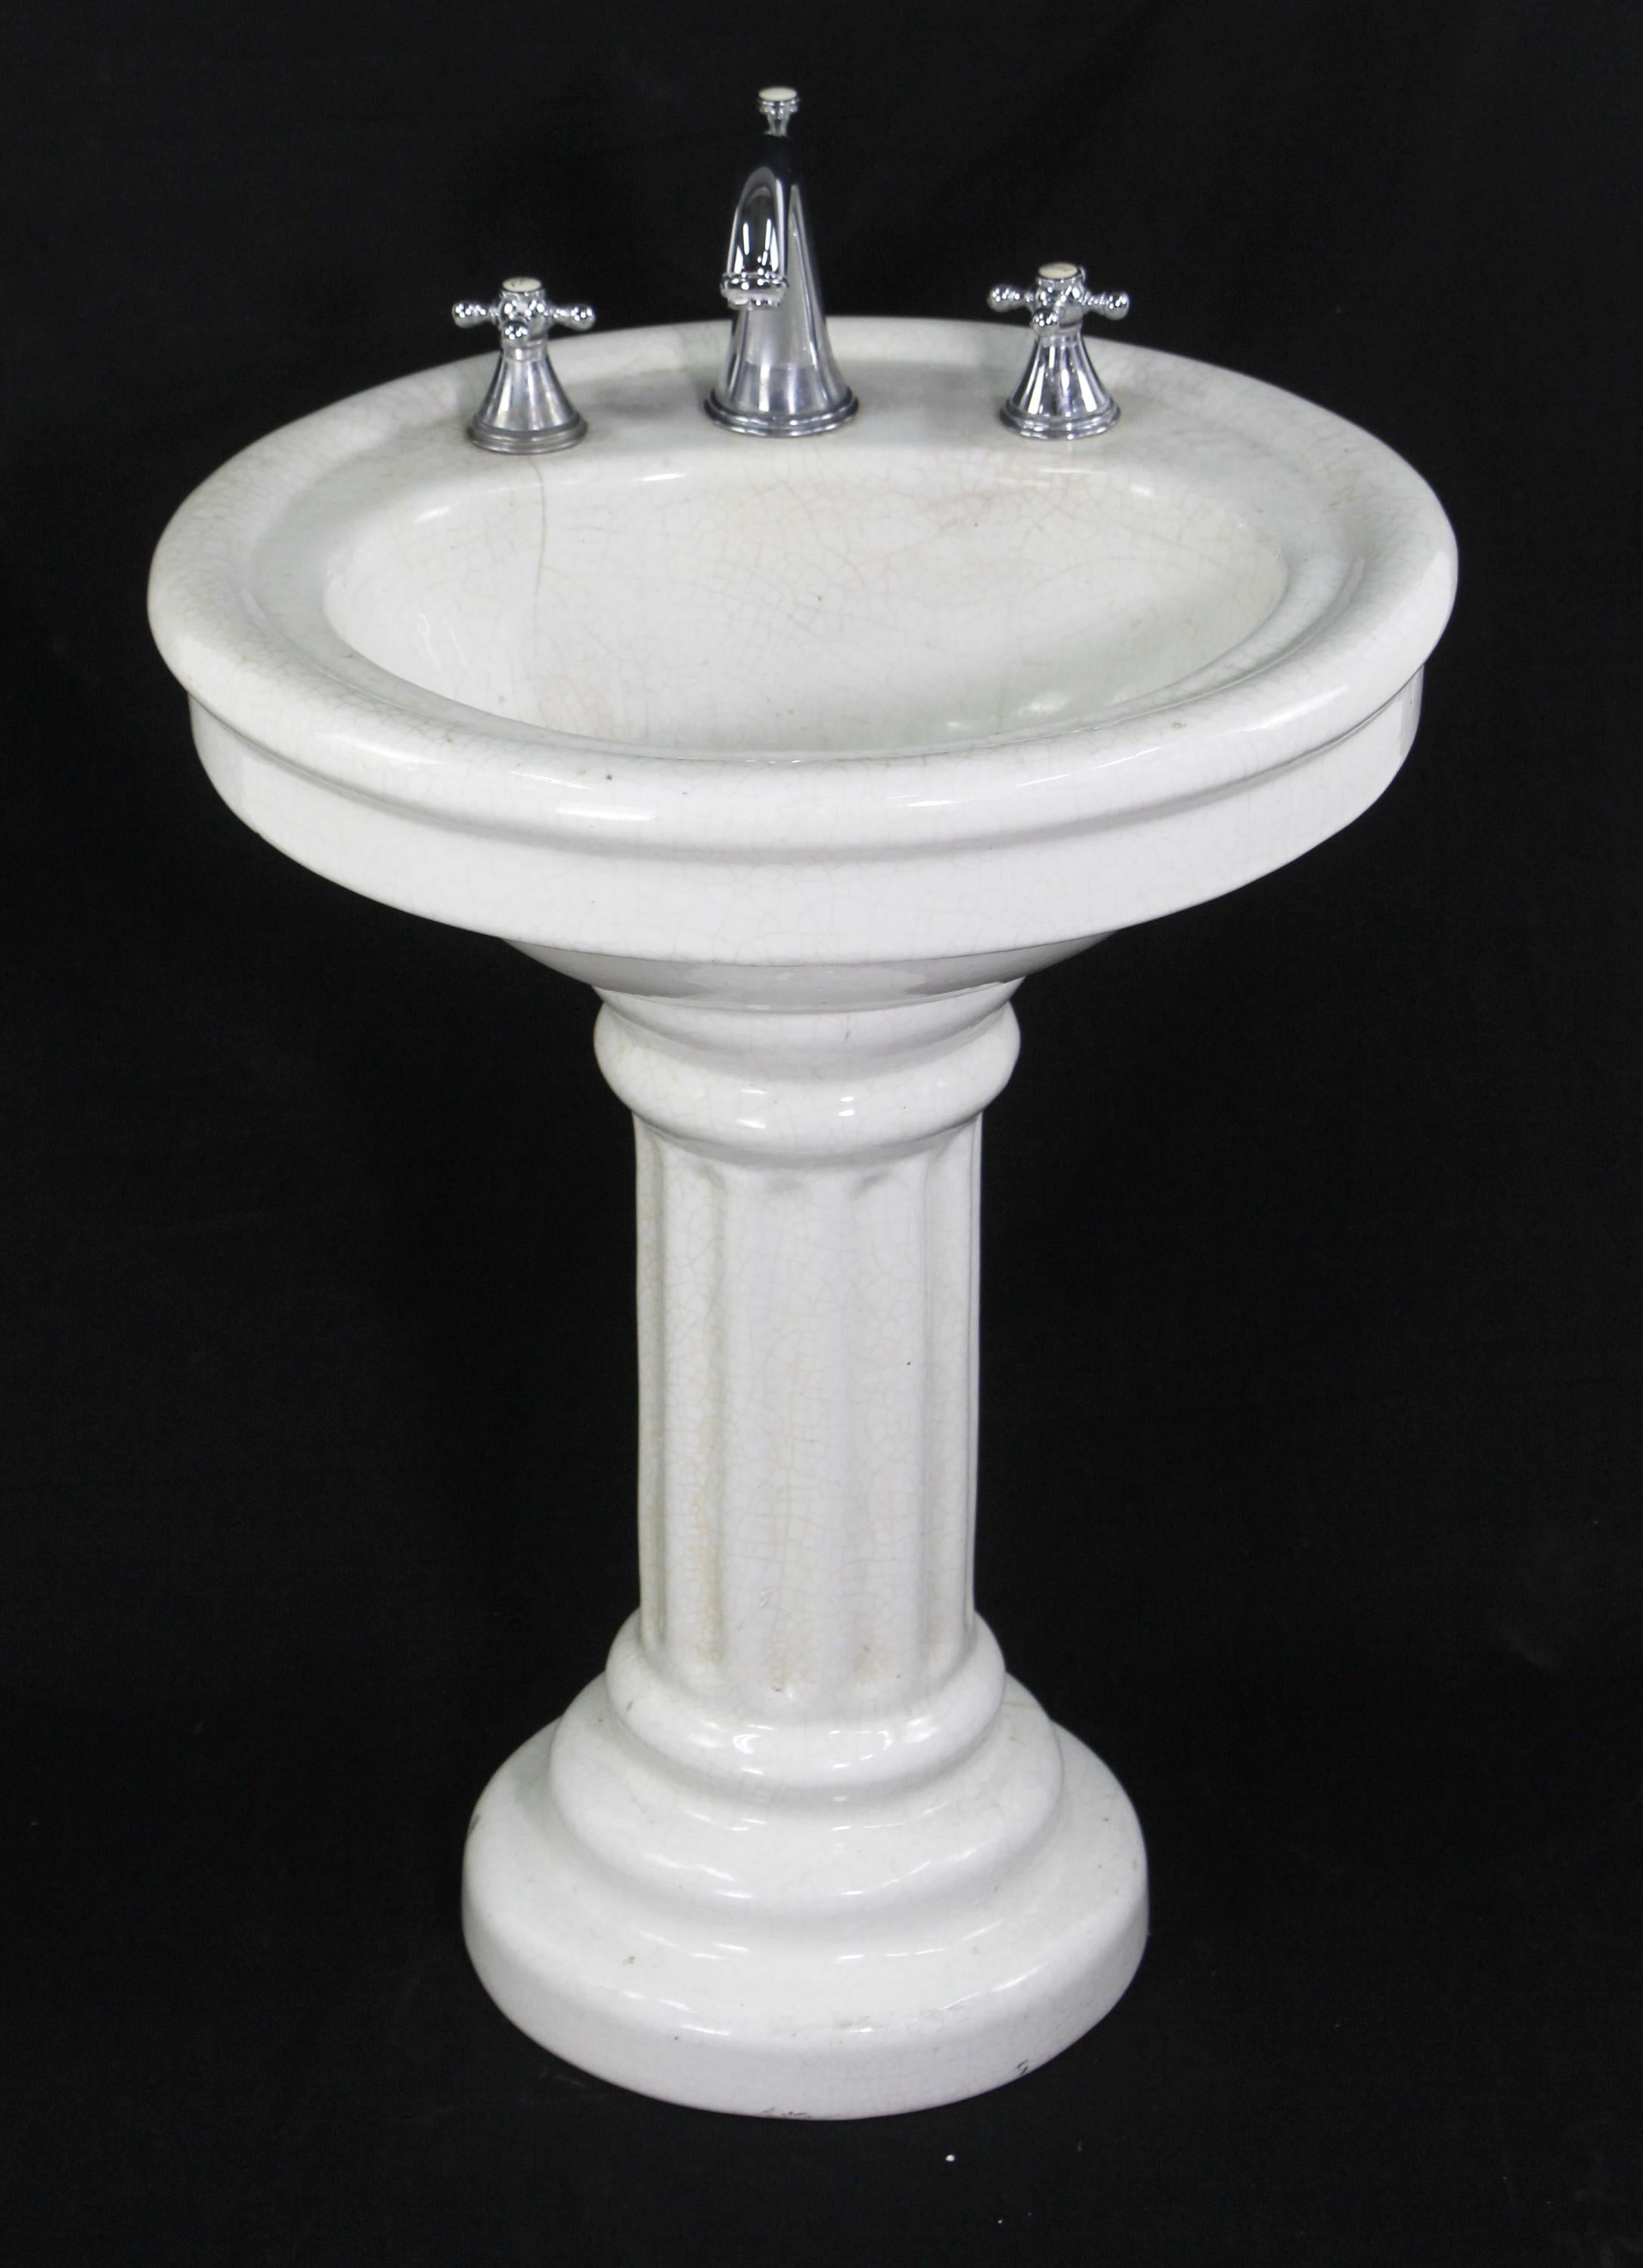 Antique early 20th century oval pedestal sink manufactured out of glazed earthenware. Pedestal features a fluted column. Glazing has crackling throughout. Minor chips. Please see the photos. Small quantity available at time of posting. Please